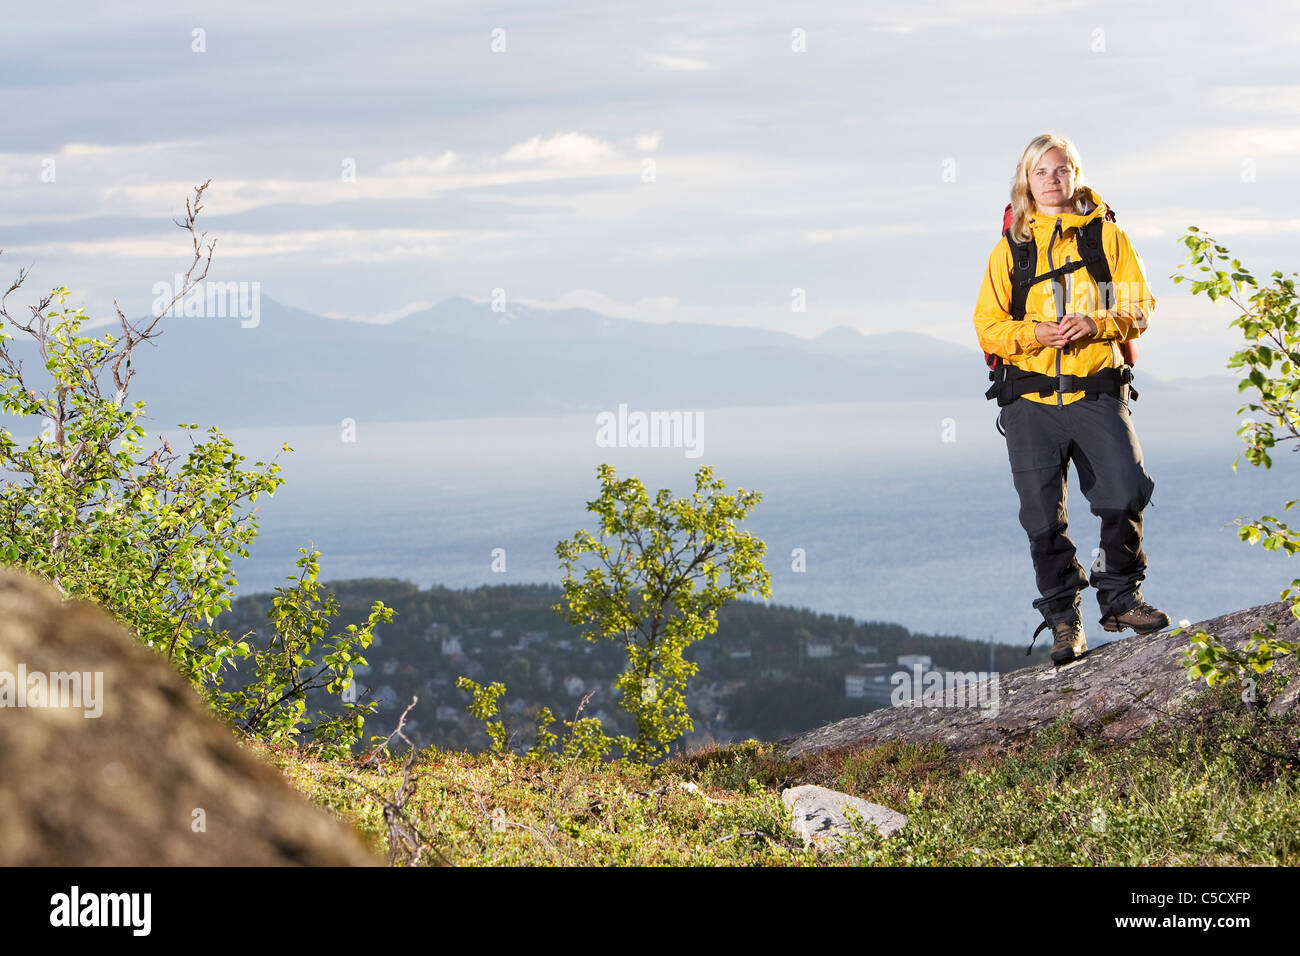 Full length portrait of a woman in yellow shell on mountain against clouds Stock Photo